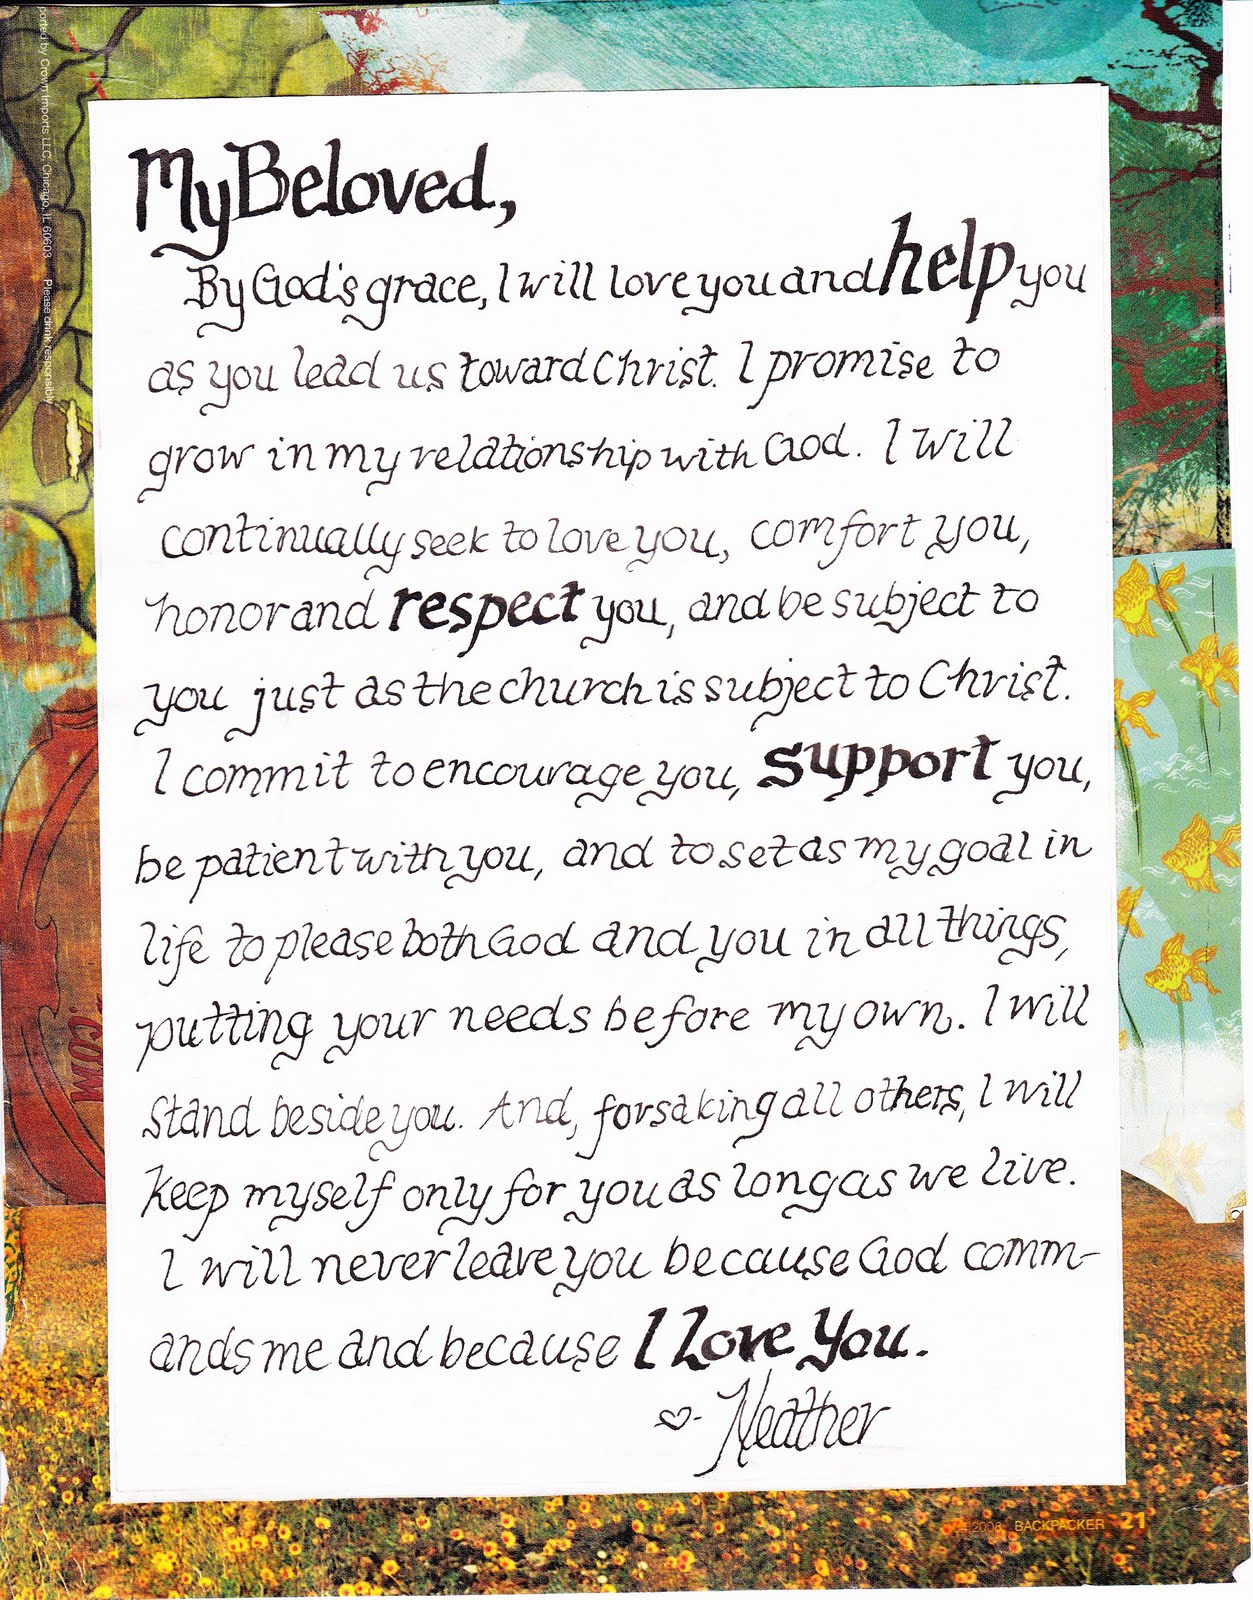 Vows written by Pastor Butch of Living Hope Church in College Station